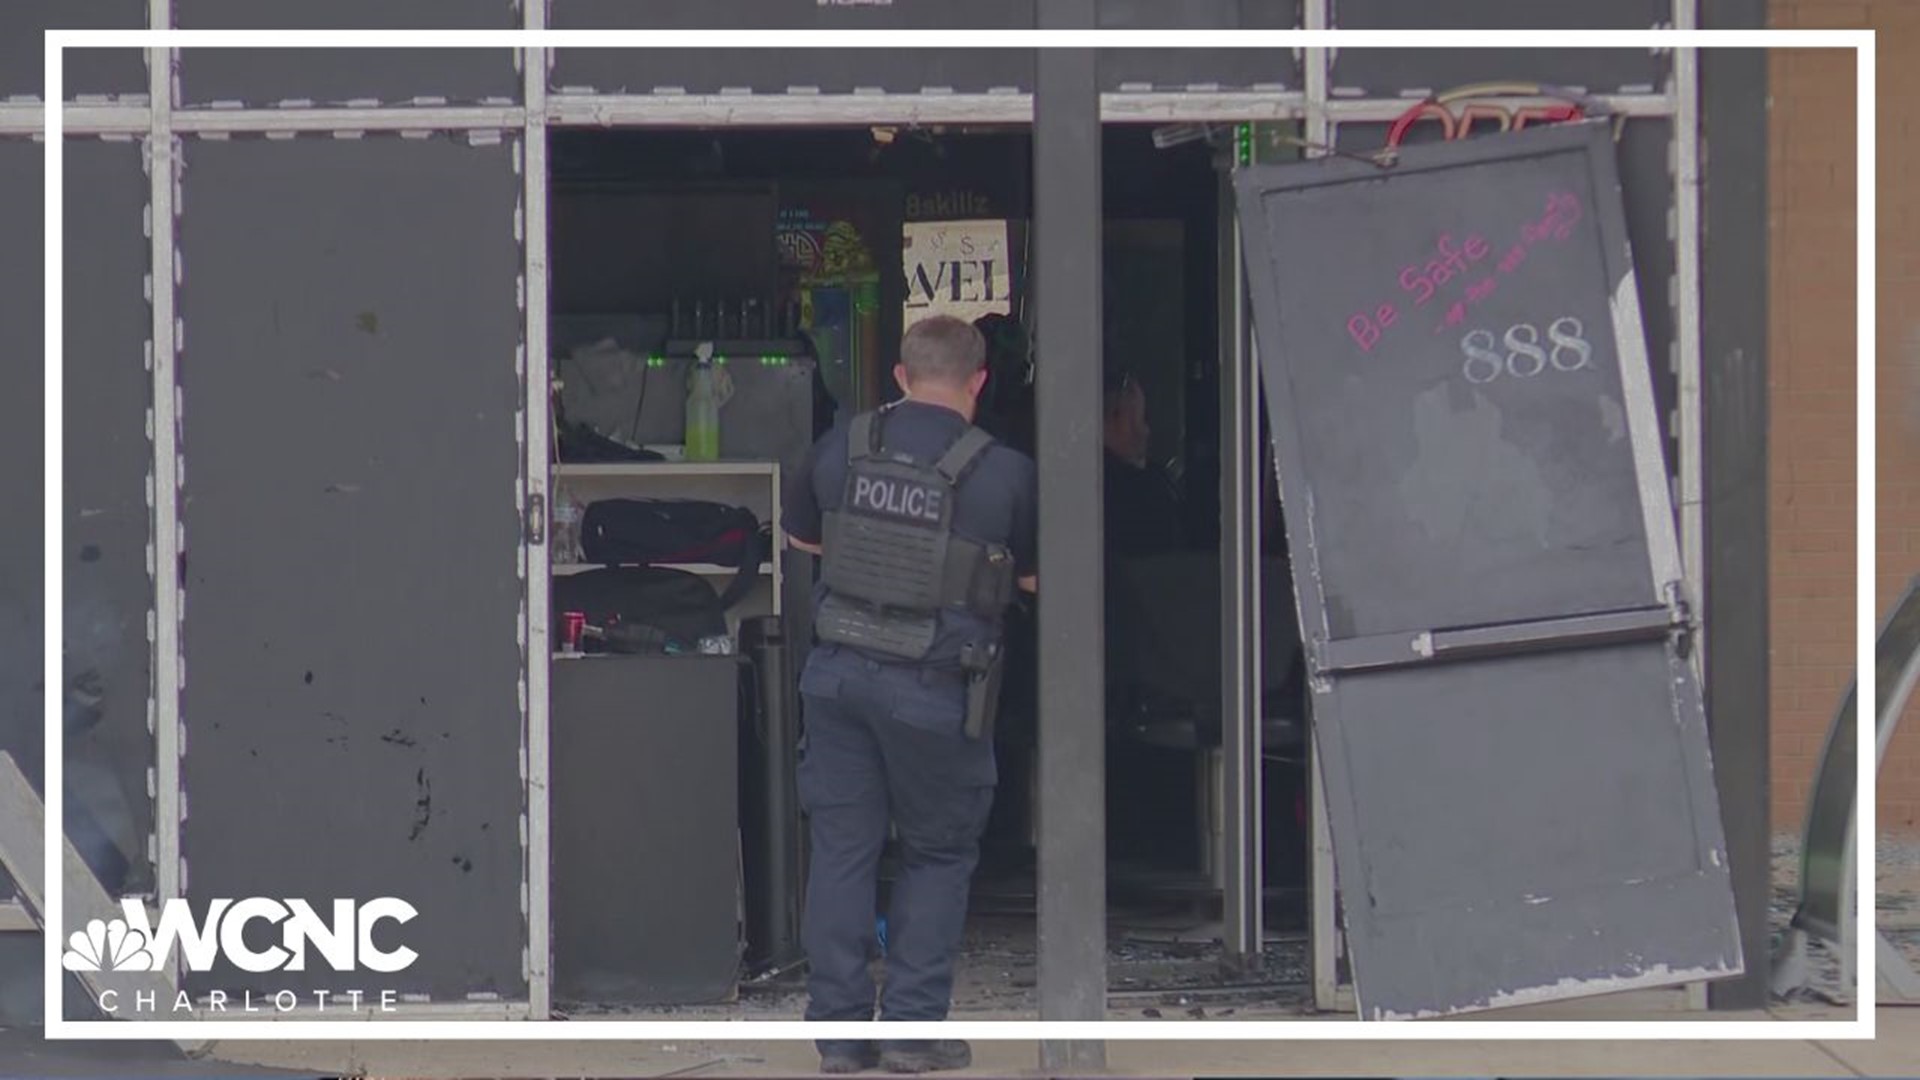 Multiple agencies appeared to be involved in the operation, which led to several raids of "skill arcades," including in east Charlotte.